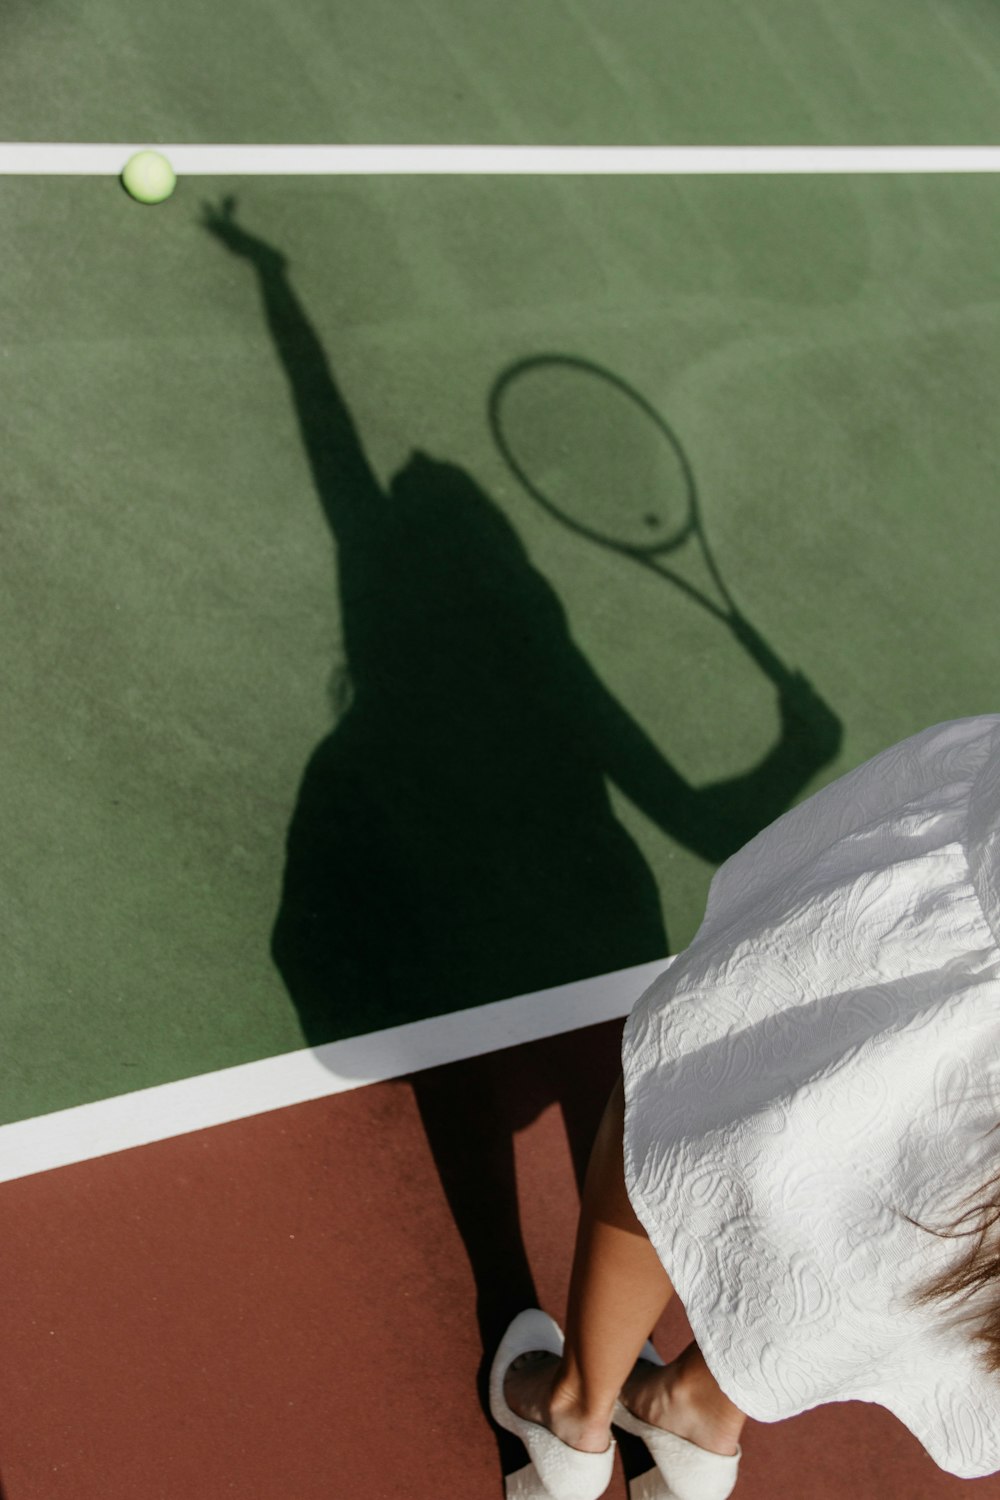 shadow of woman playing tennis on court